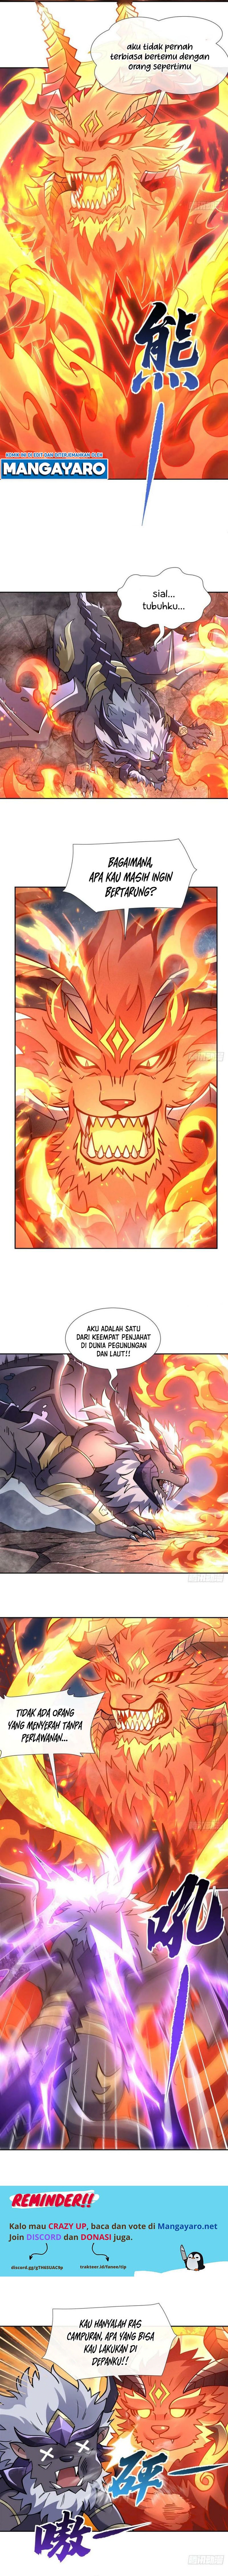 Dilarang COPAS - situs resmi www.mangacanblog.com - Komik my female apprentices are all big shots from the future 167 - chapter 167 168 Indonesia my female apprentices are all big shots from the future 167 - chapter 167 Terbaru 6|Baca Manga Komik Indonesia|Mangacan